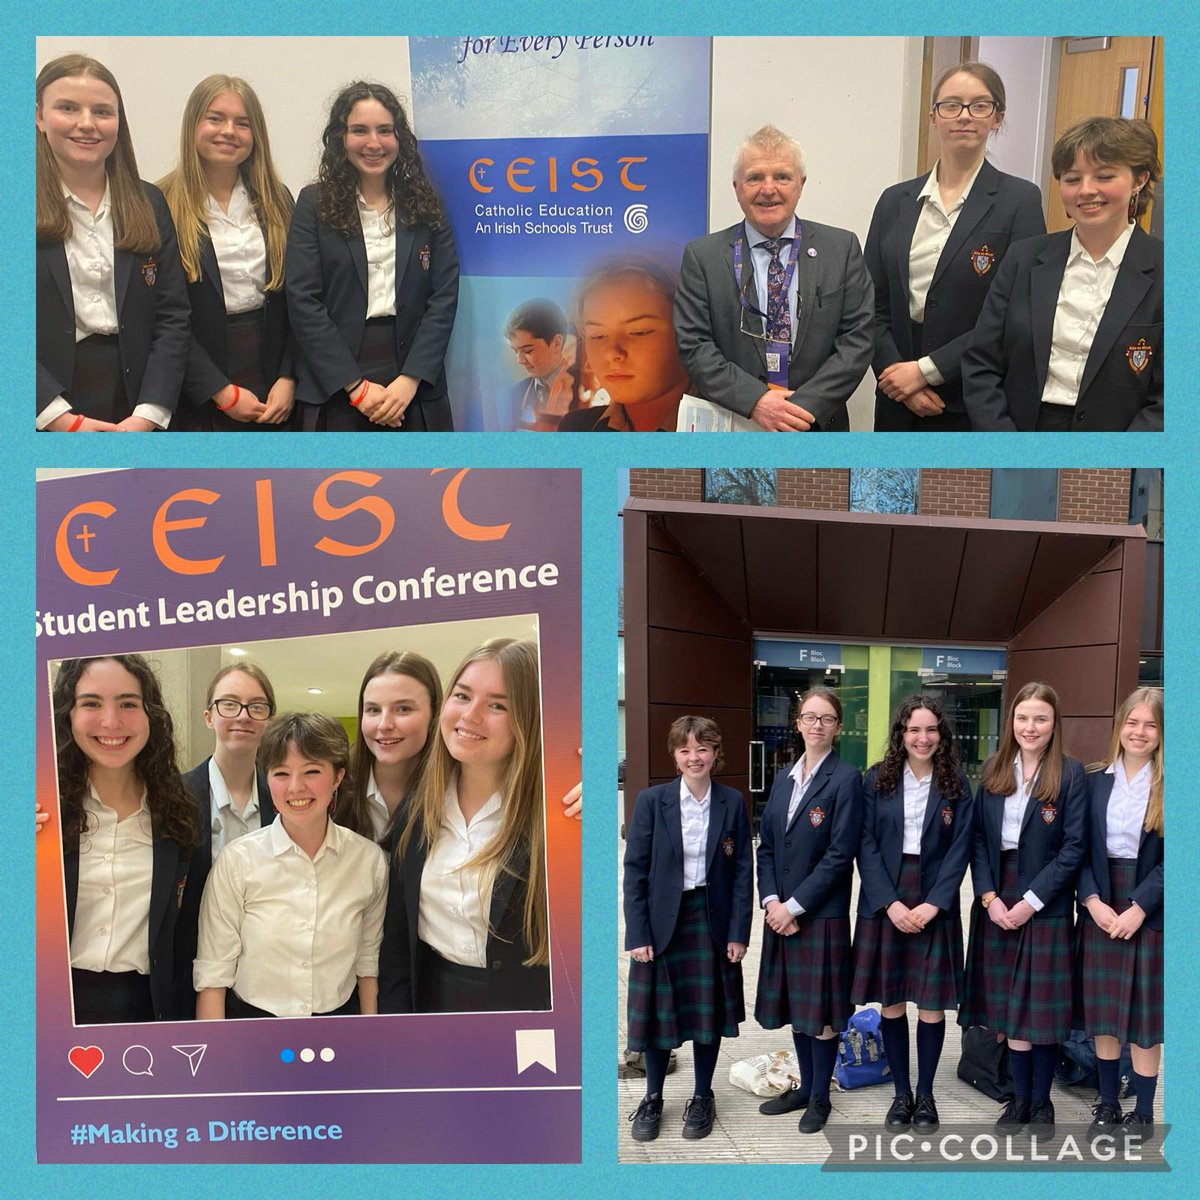 Thank you to our Ceannaire and Leas Ceannaire who attended the Student Leadership Conference hosted by CEIST today. Thank you to Ms.Ryan who accompanied the group. @CeistTrust